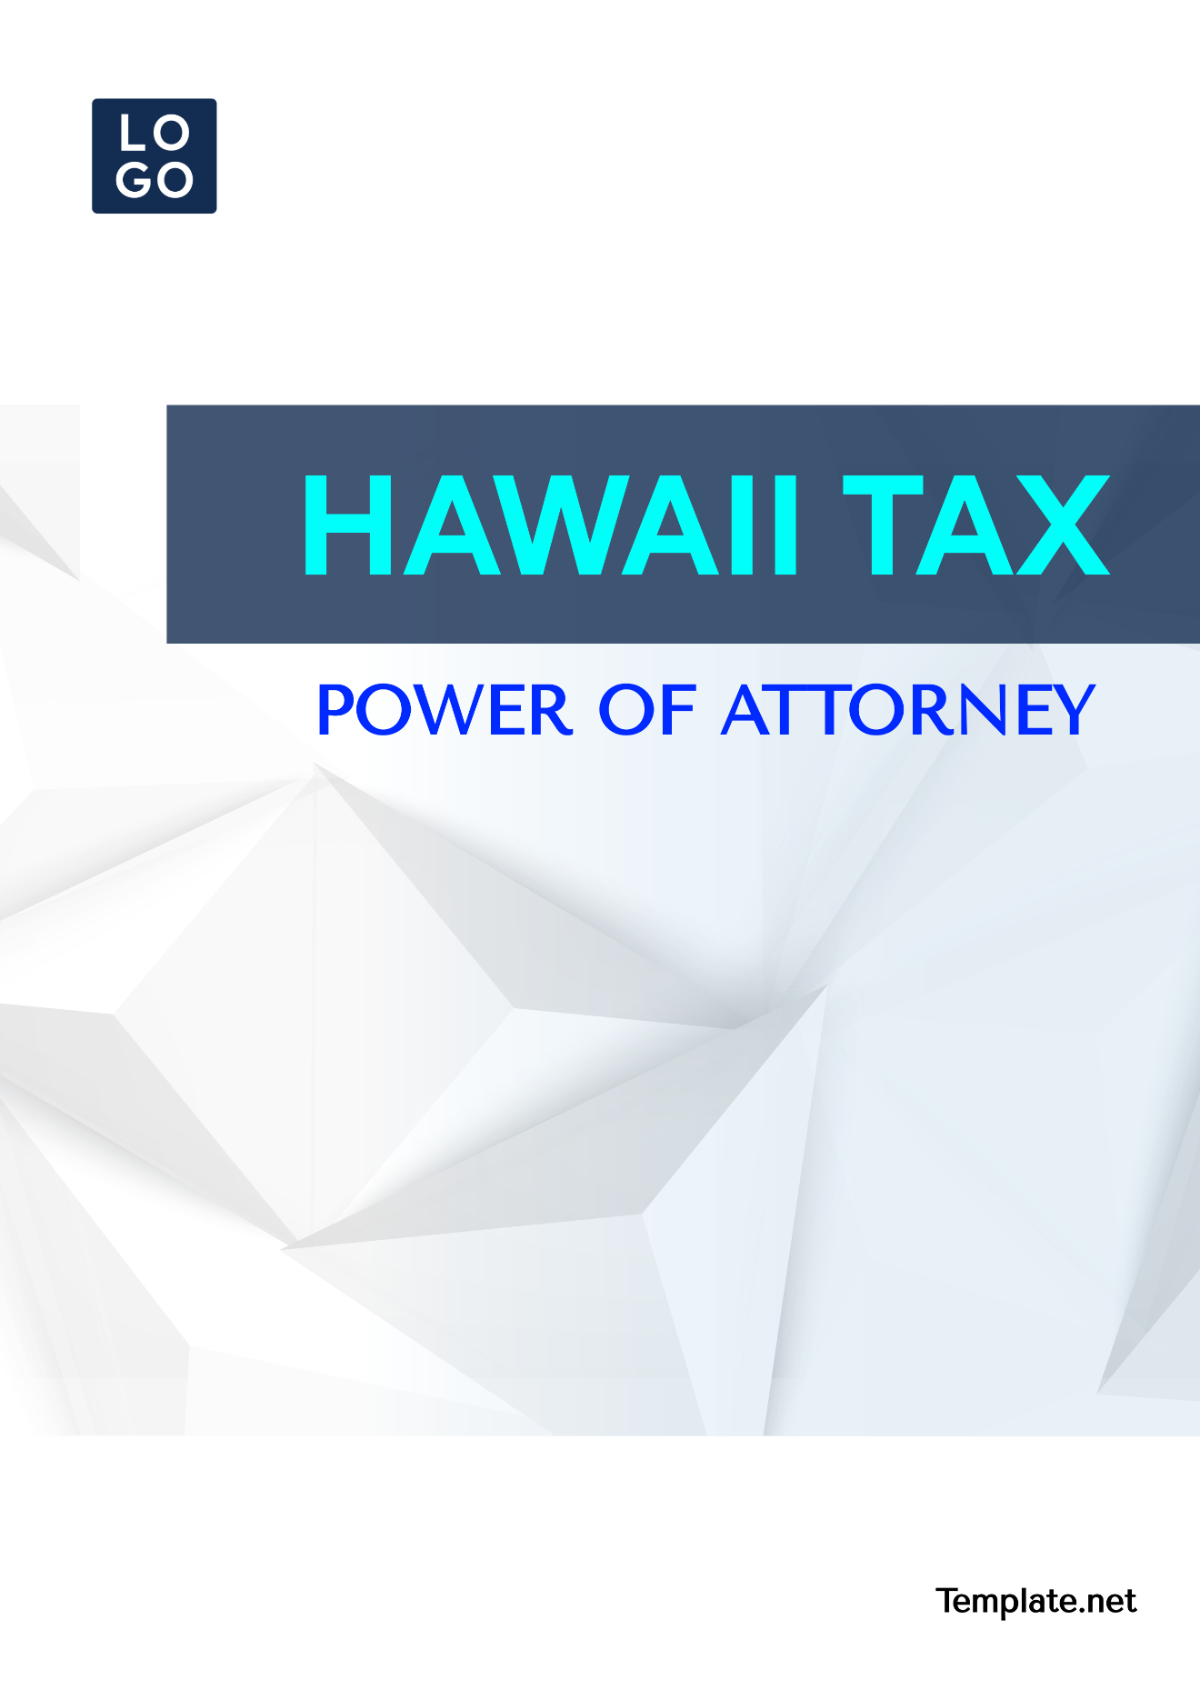 Hawaii Tax Power of Attorney Template